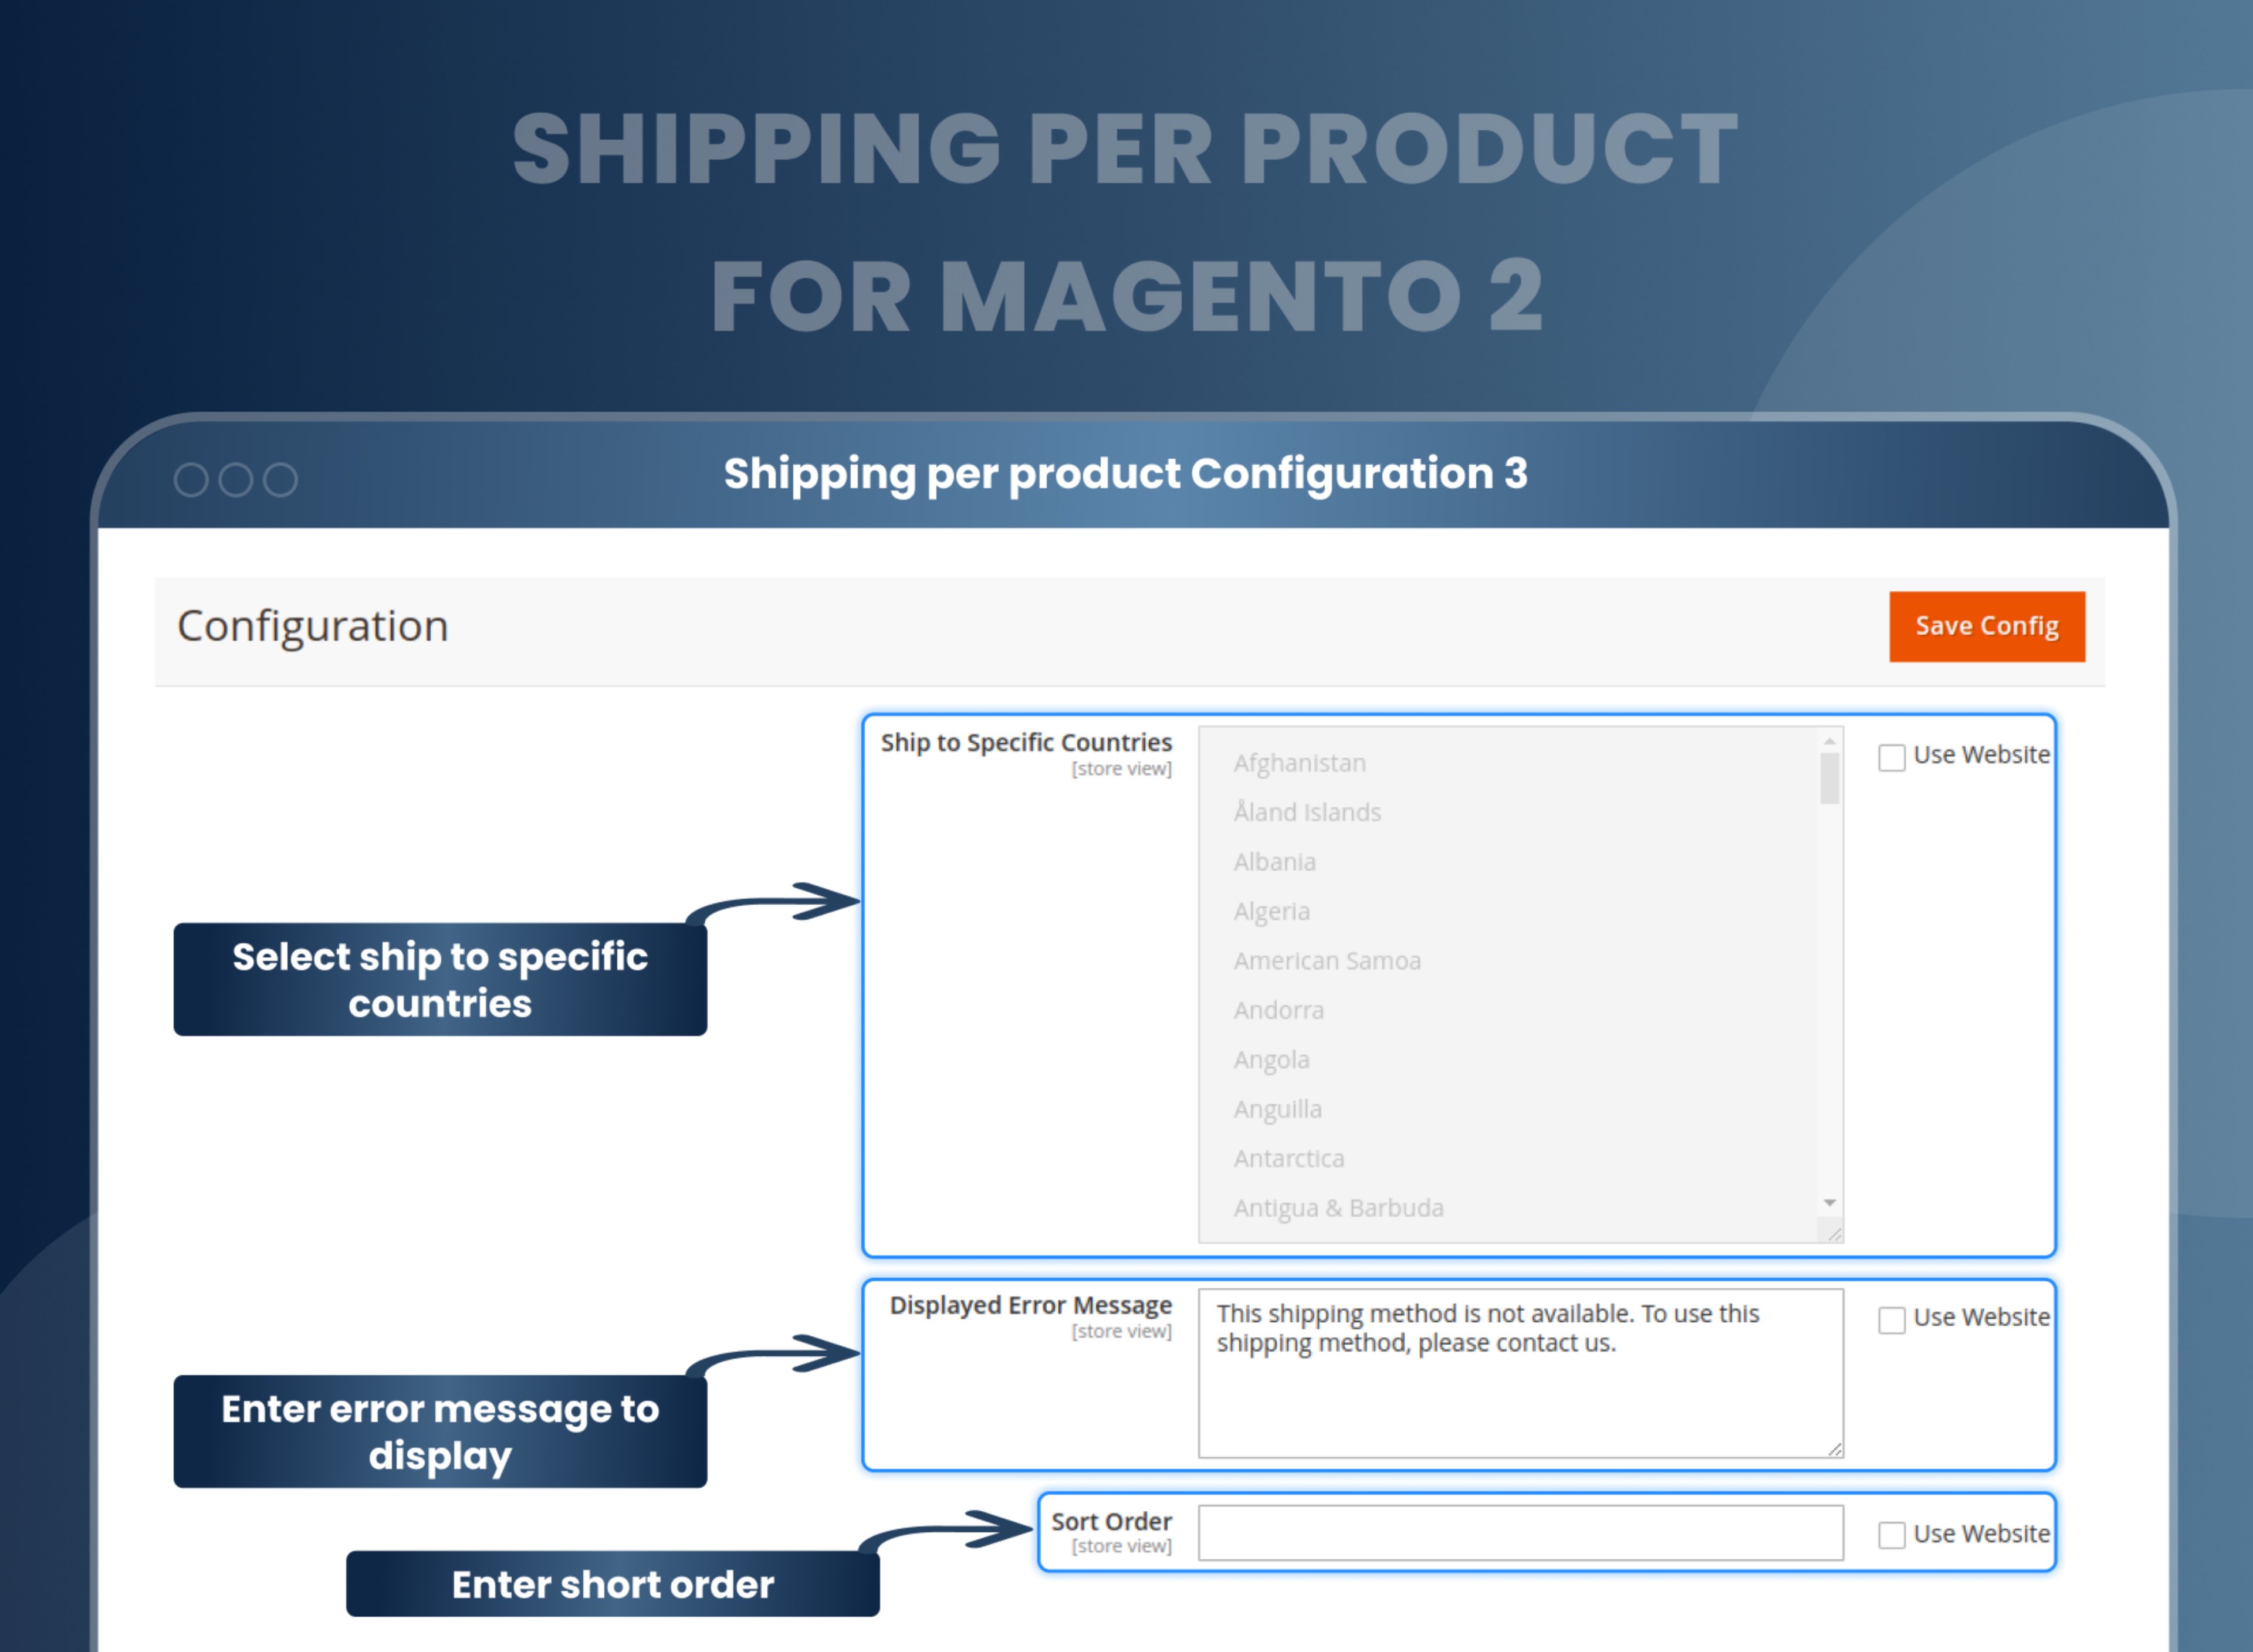 Shipping per product Configuration 3